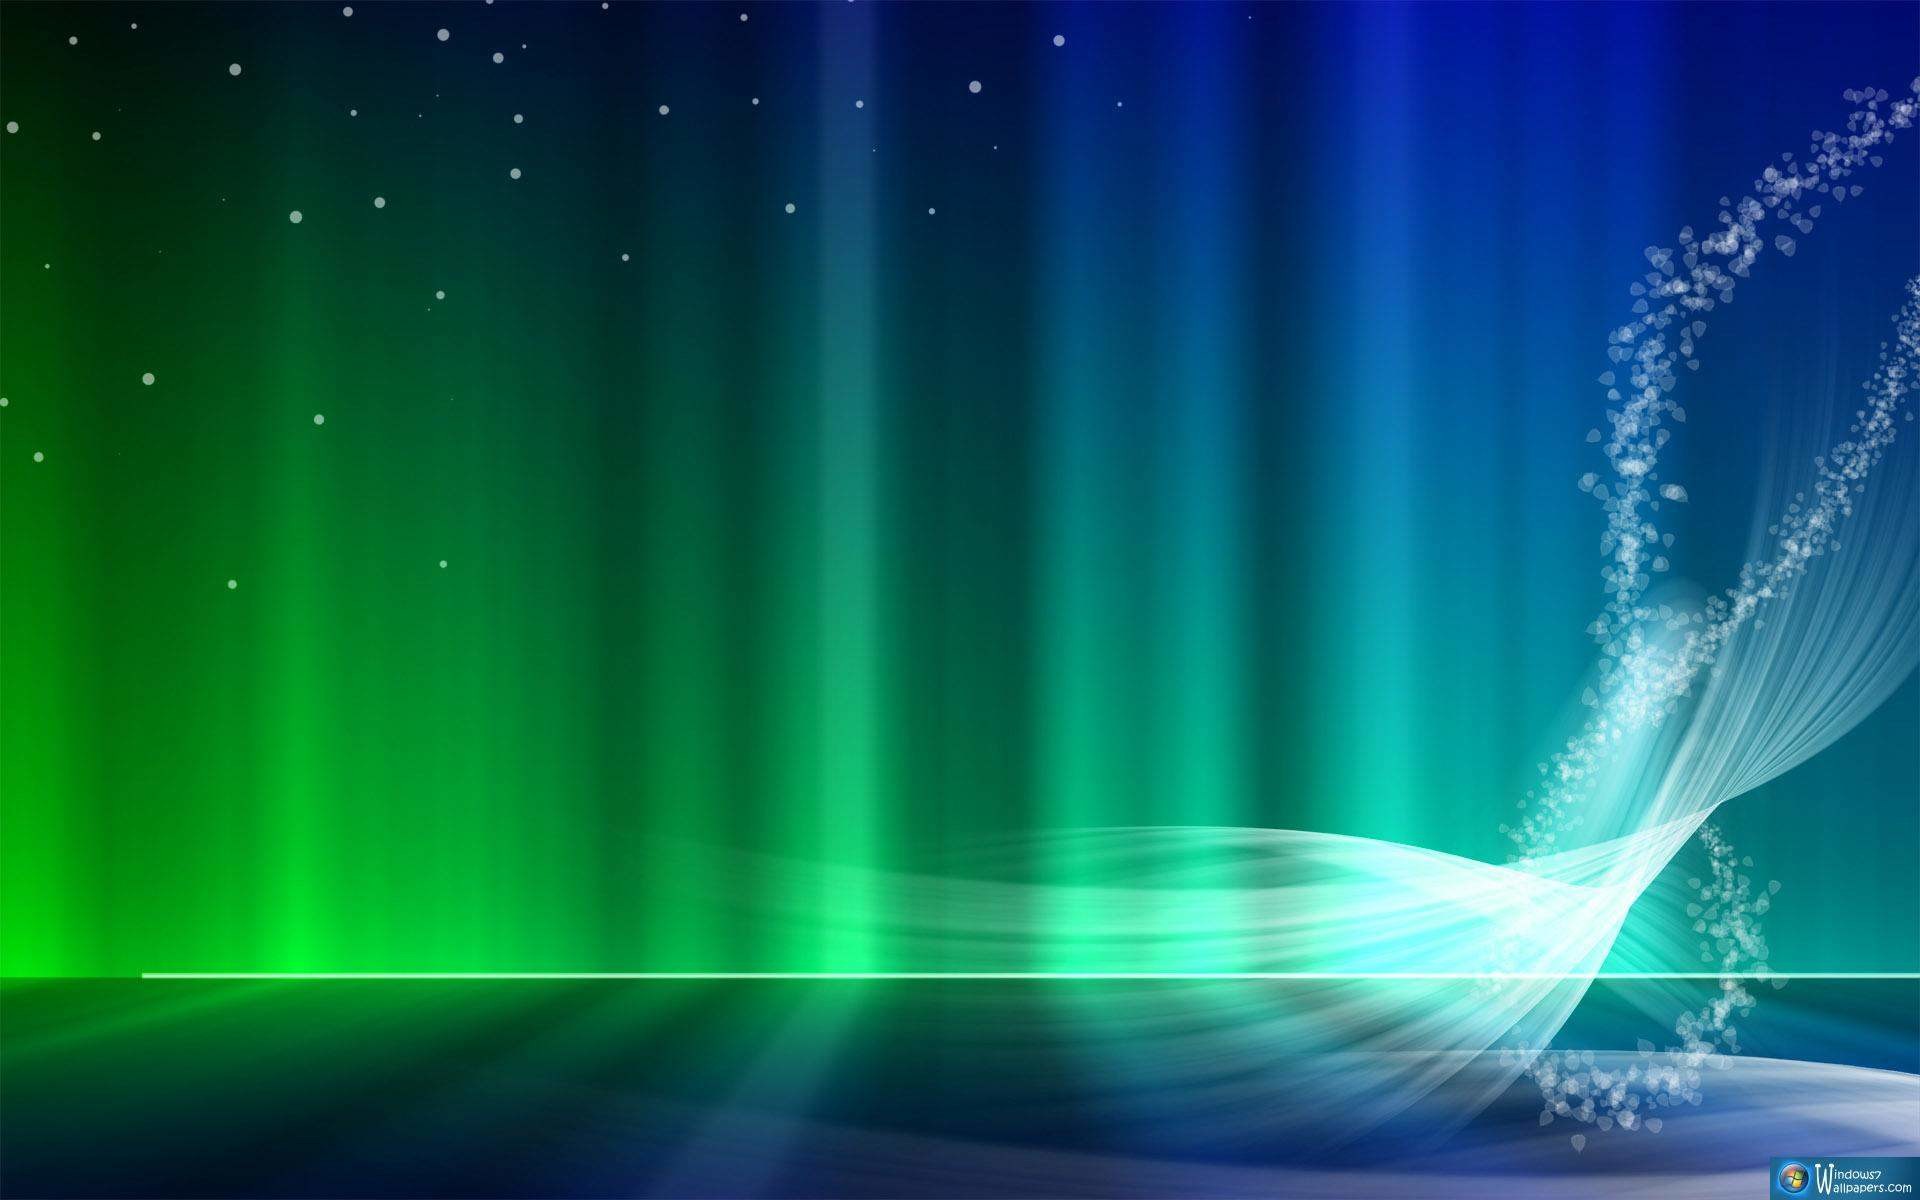 Live Water Wallpaper for Windows 